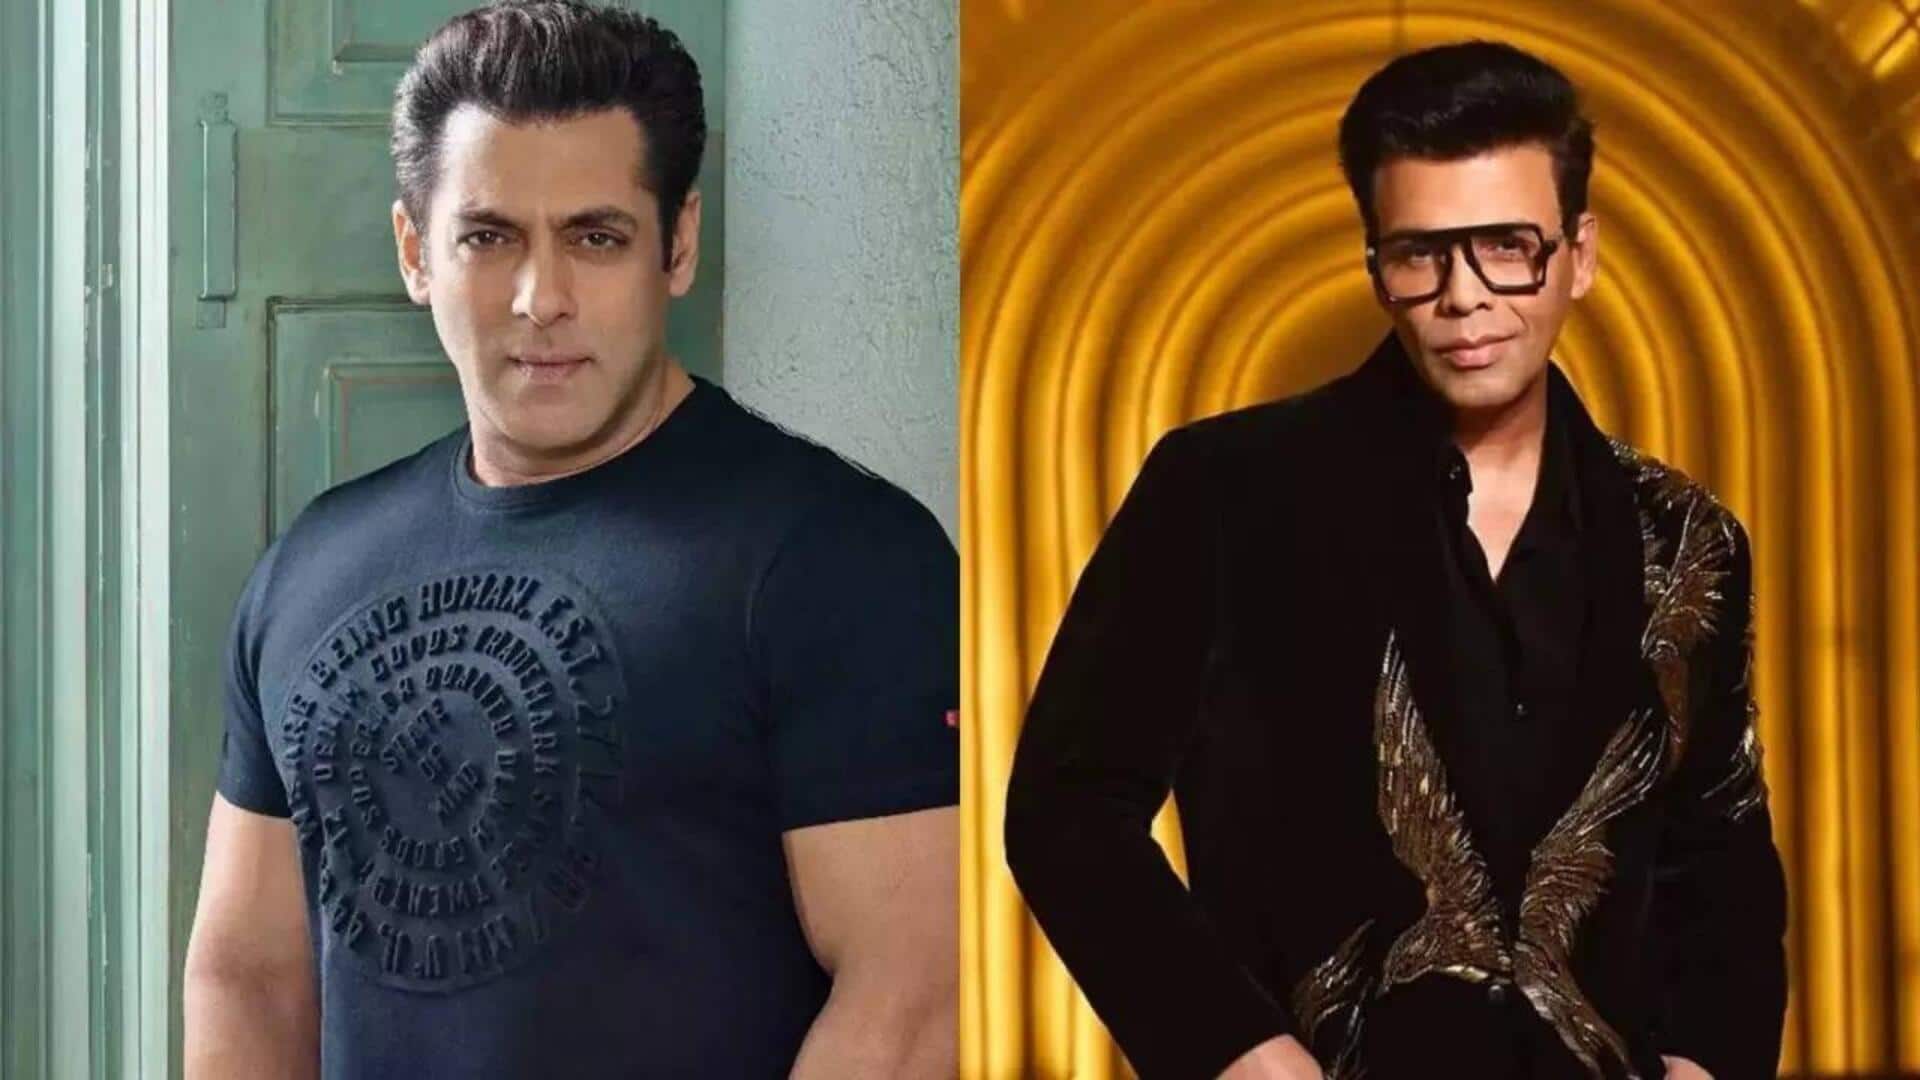 Salman steps away from 'The Bull' due to delays: Report